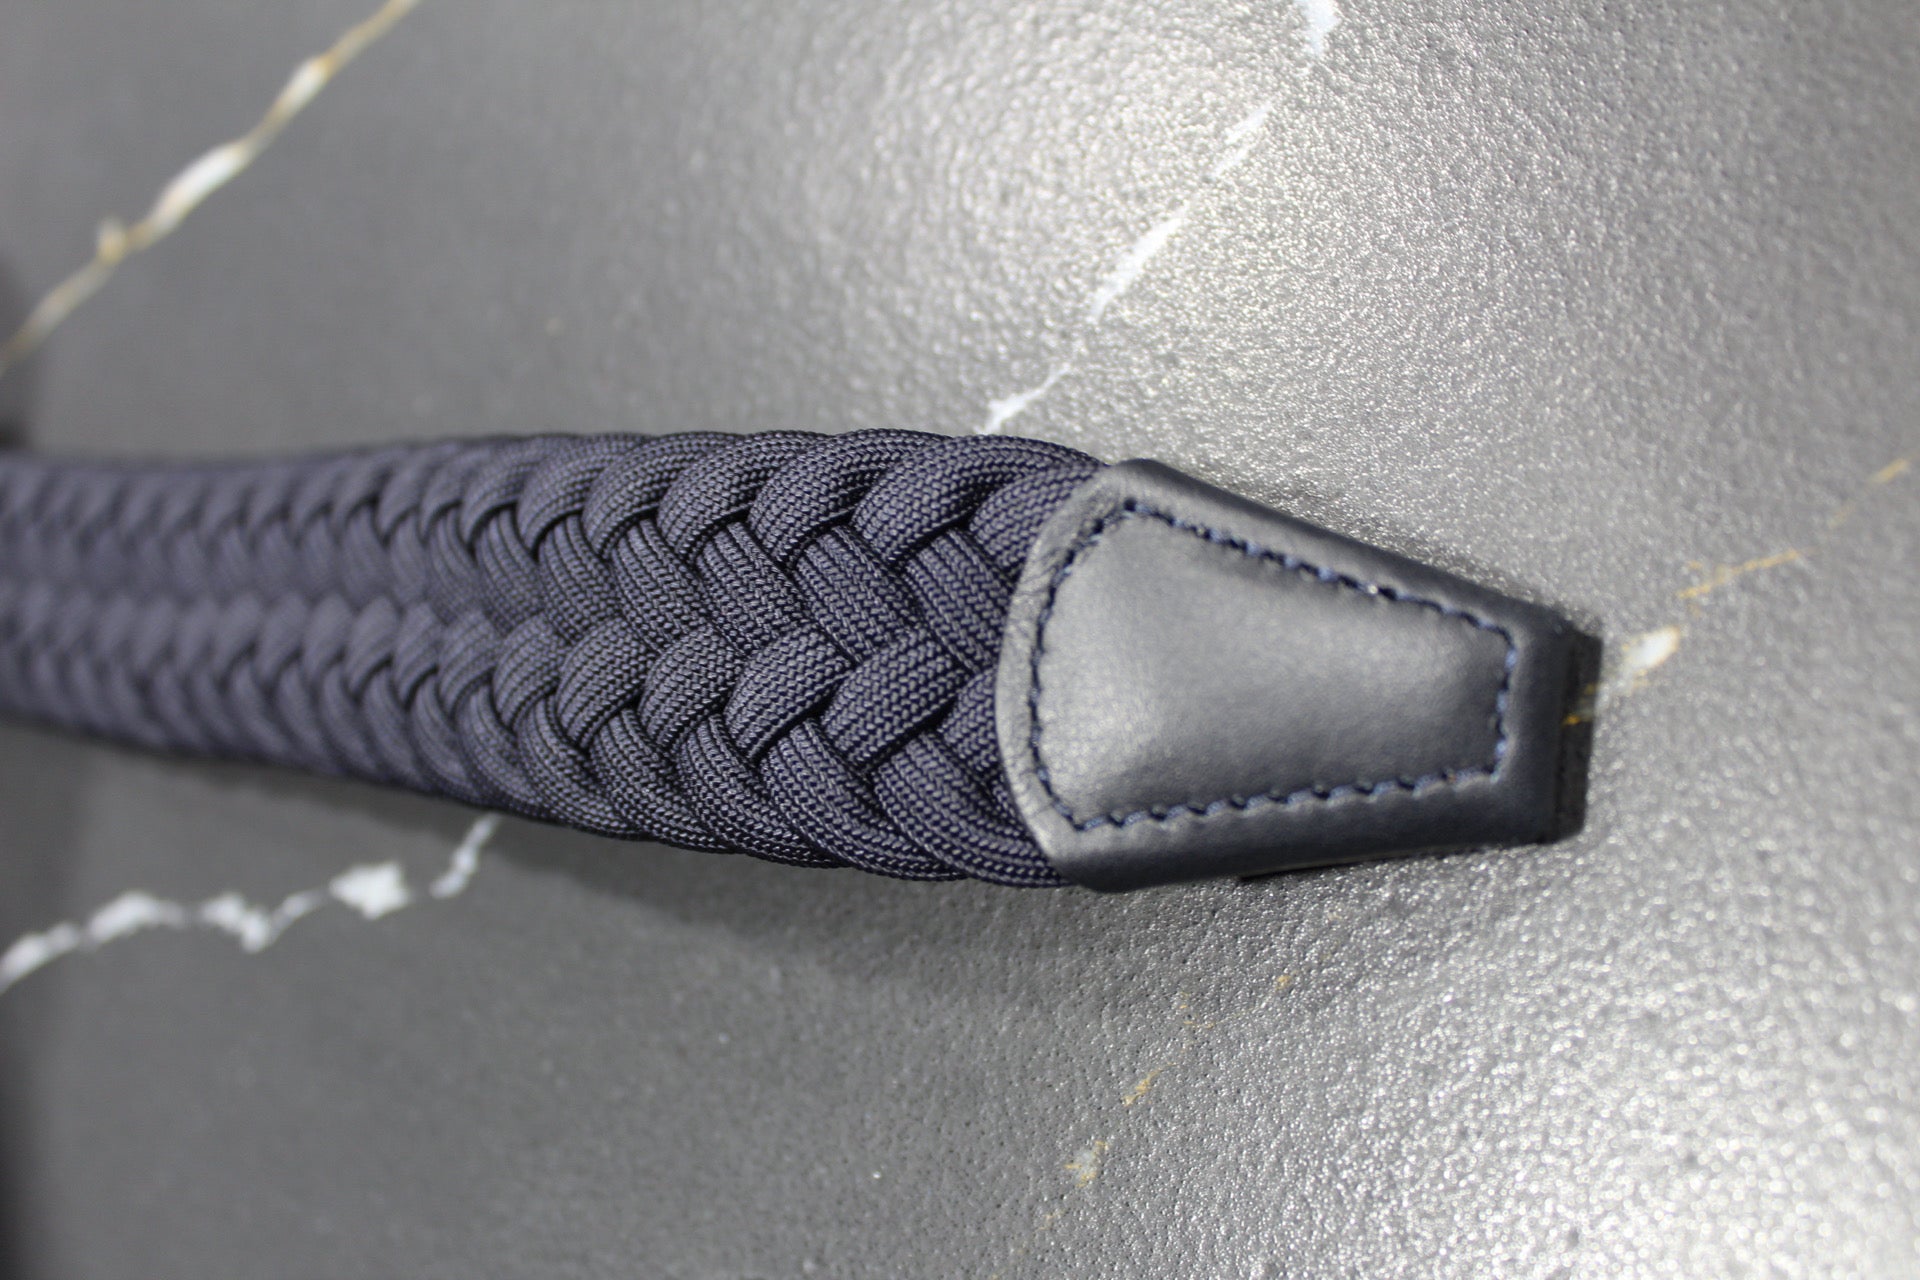 Andersons Braided Belt Made In Italy